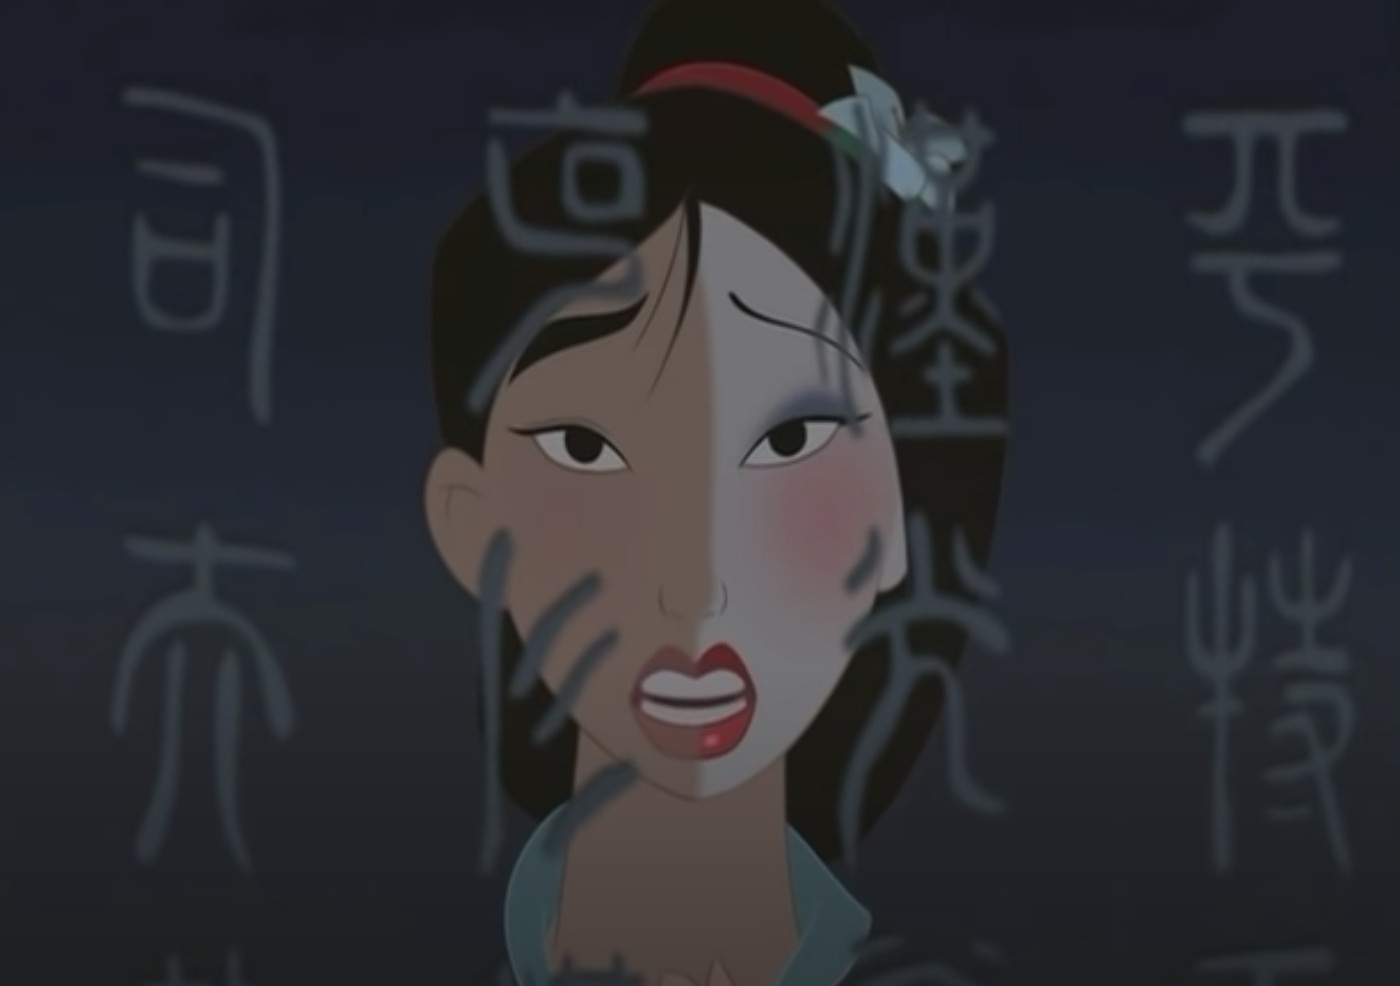 How Disney's Mulan became a queer icon - Vox